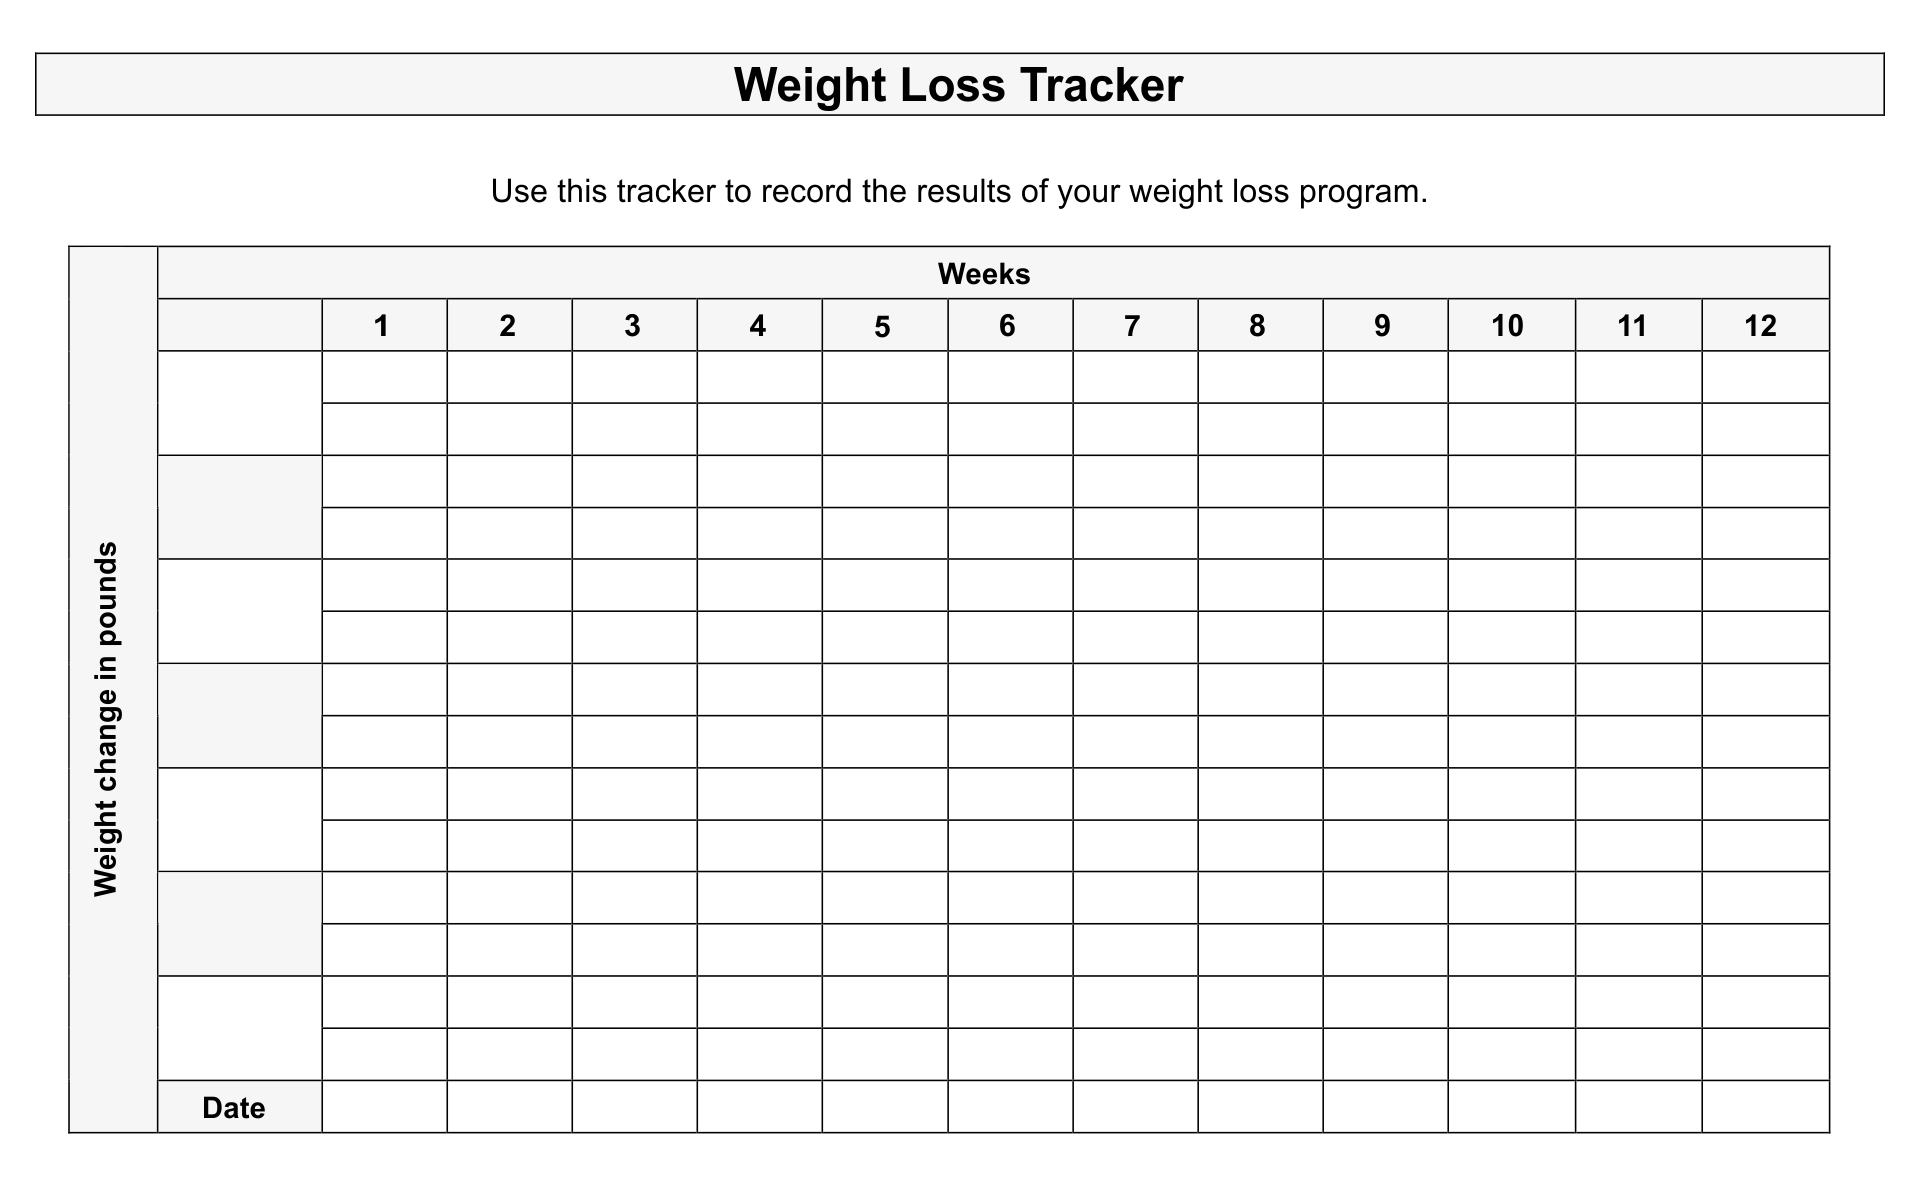 weight-tracker-notion-template